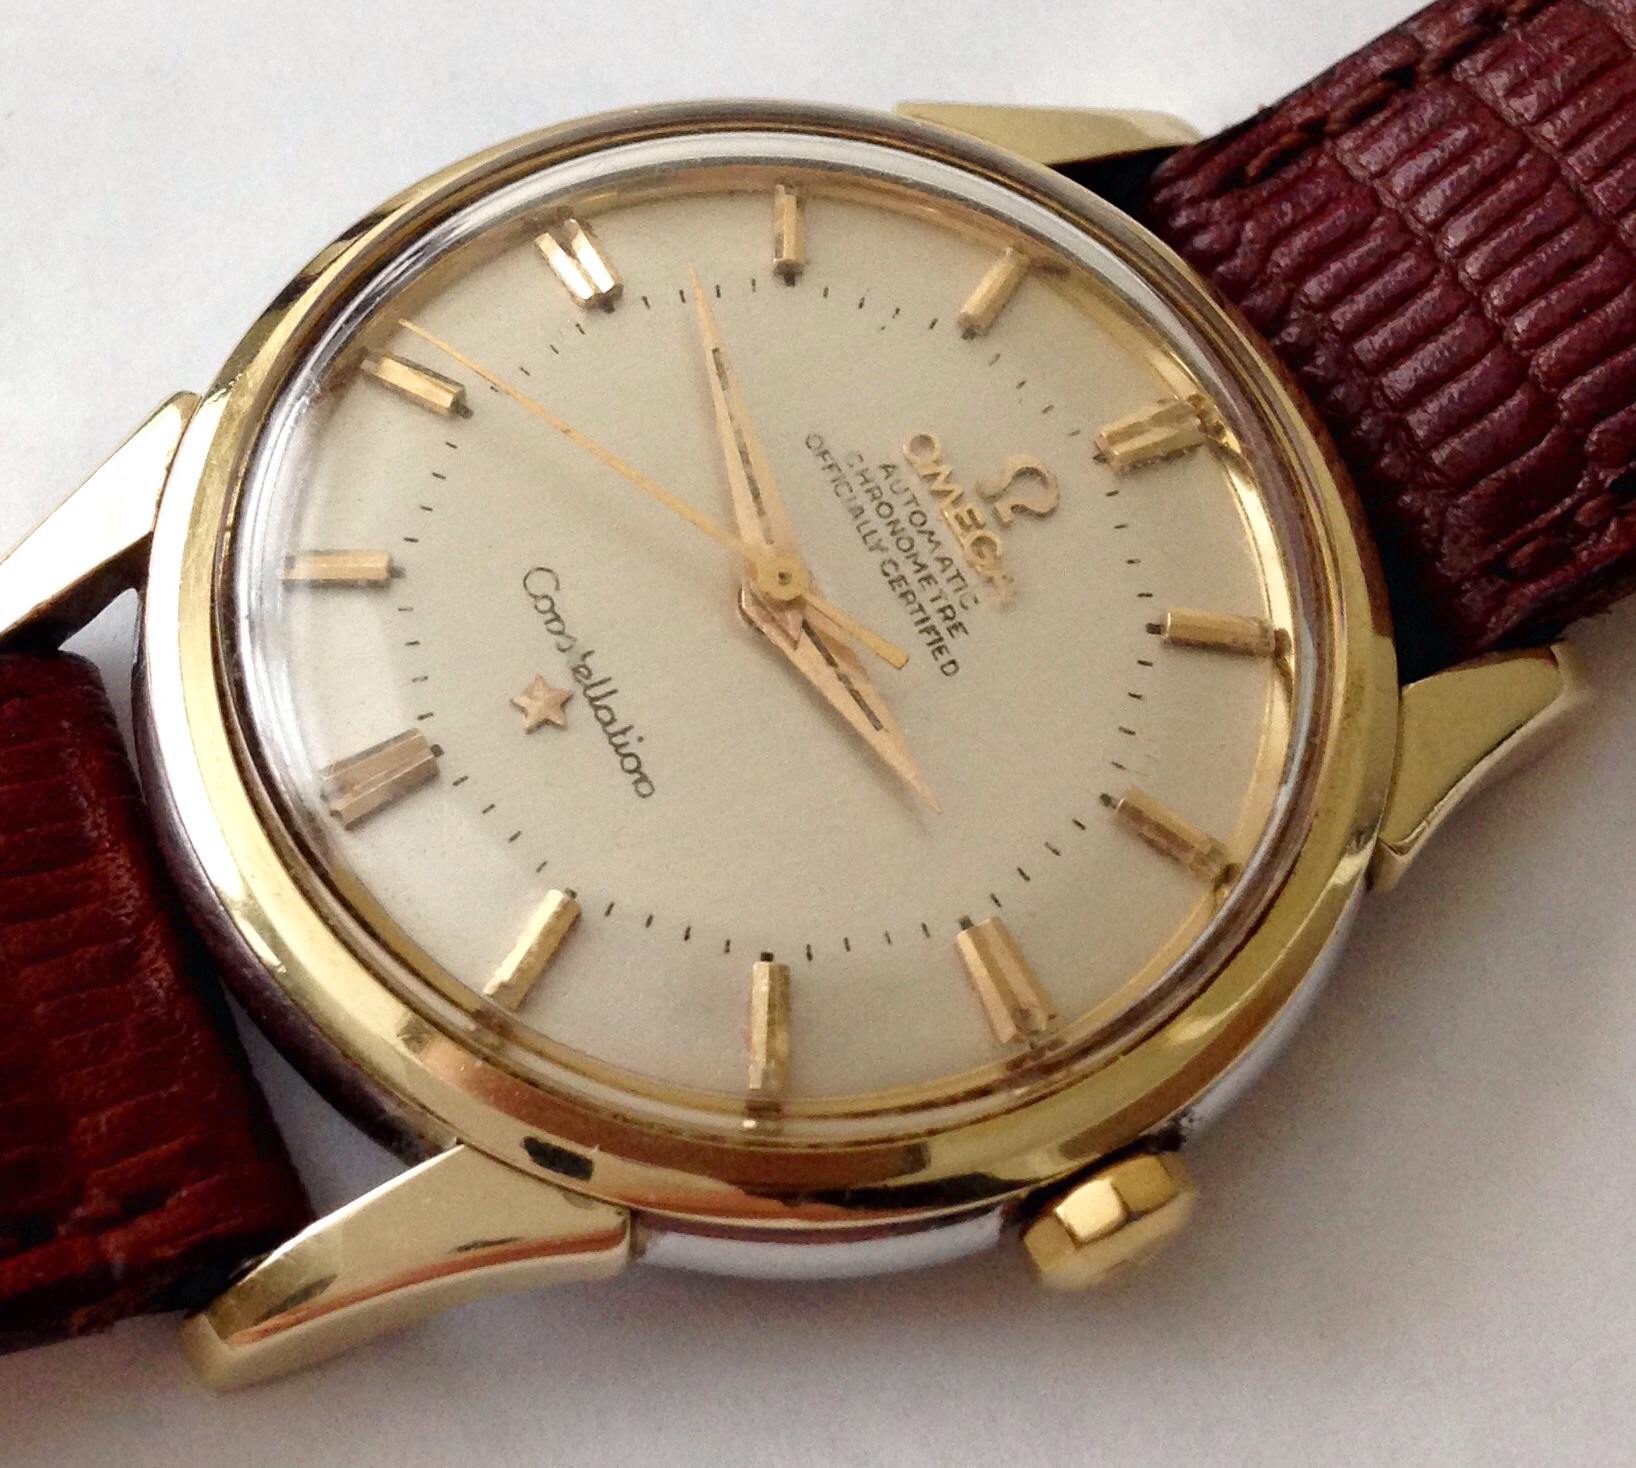 Omega Constellation cal. 551 - redial 